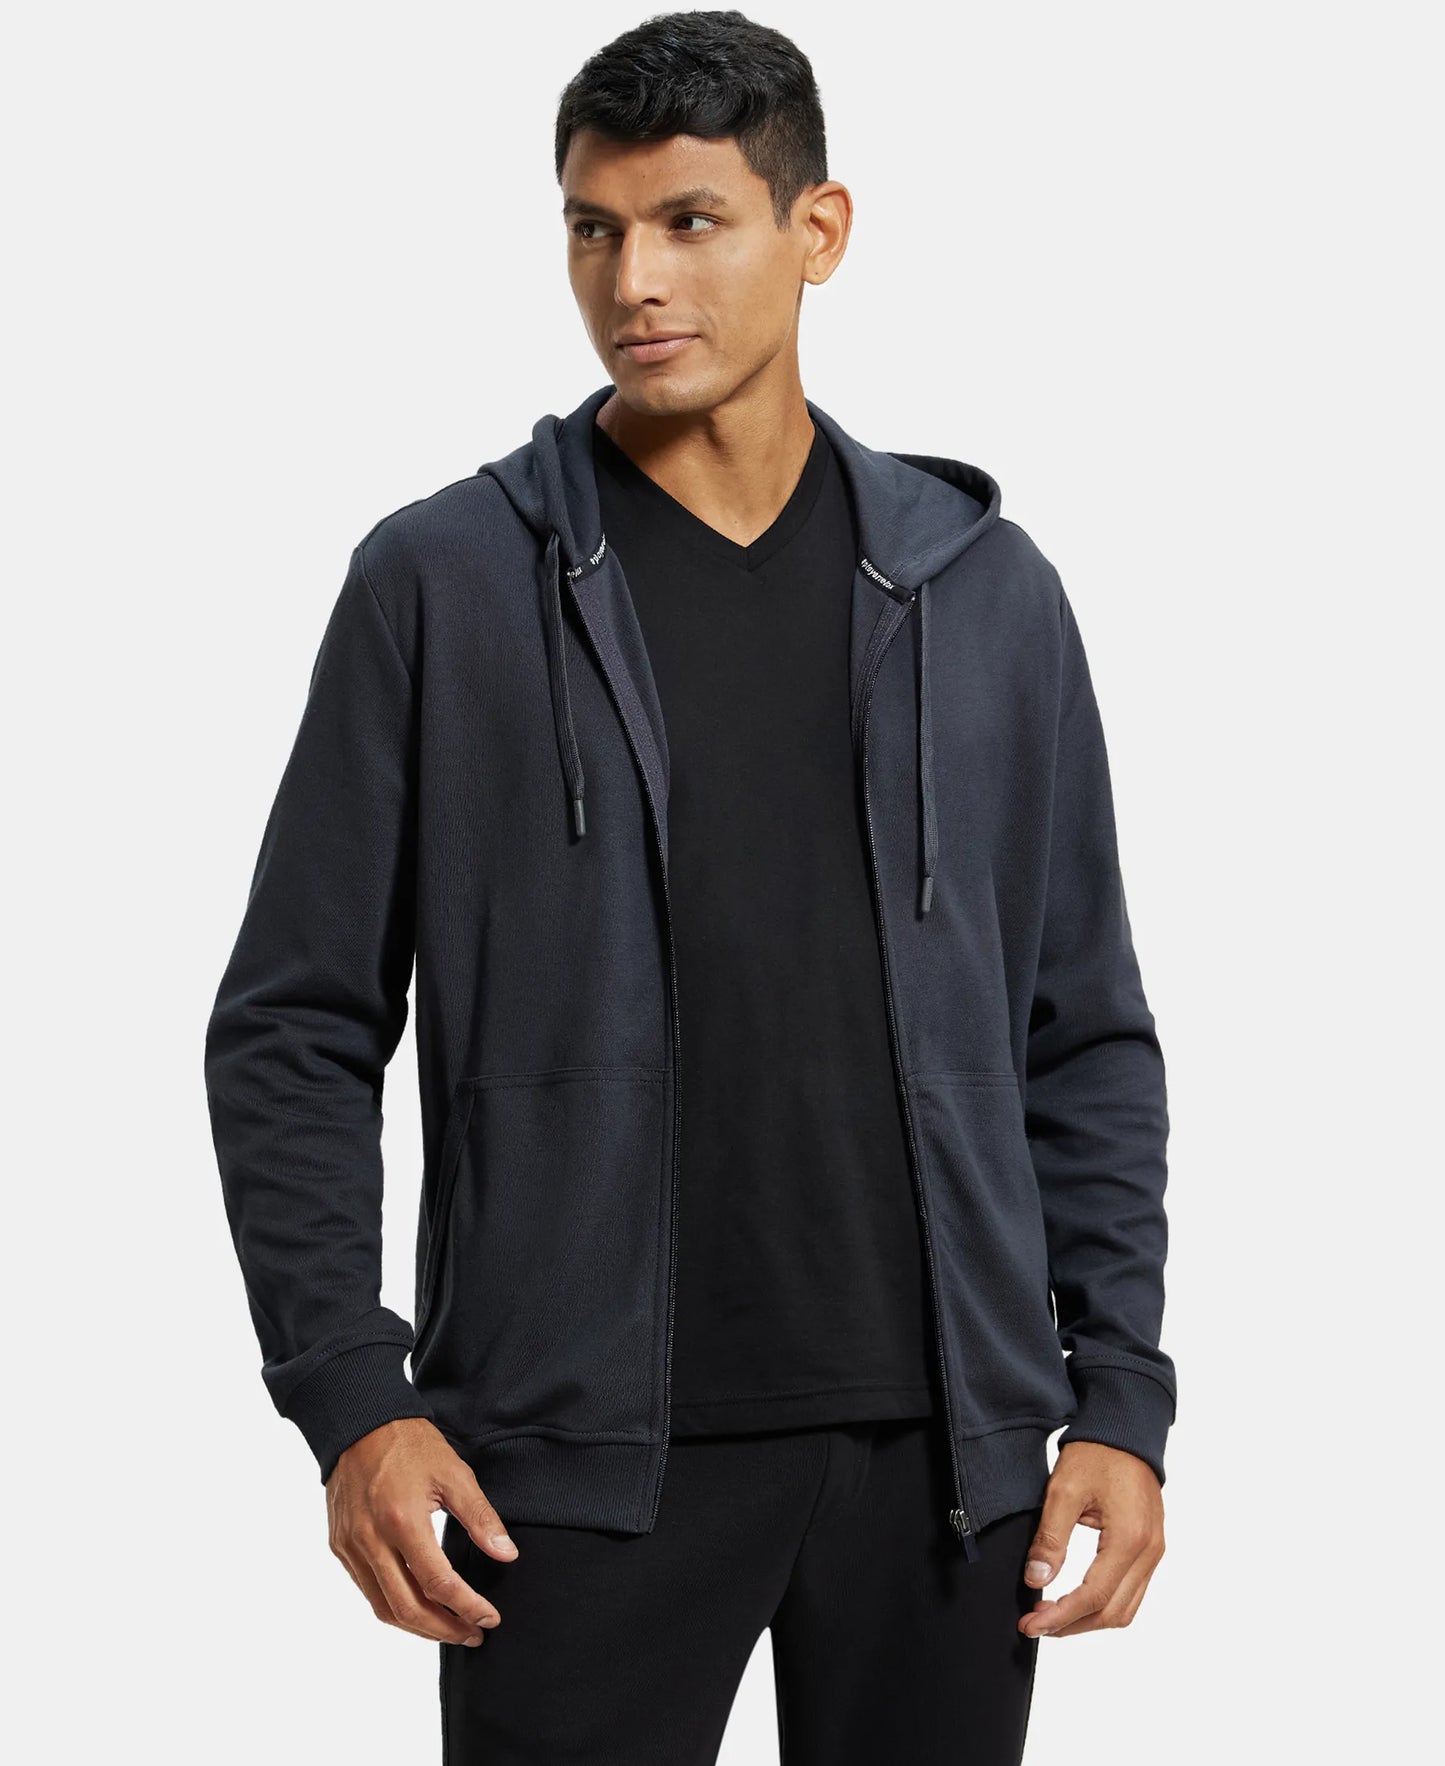 Super Combed Cotton Rich Pique Hoodie Jacket with Ribbed Cuffs - Graphite-1